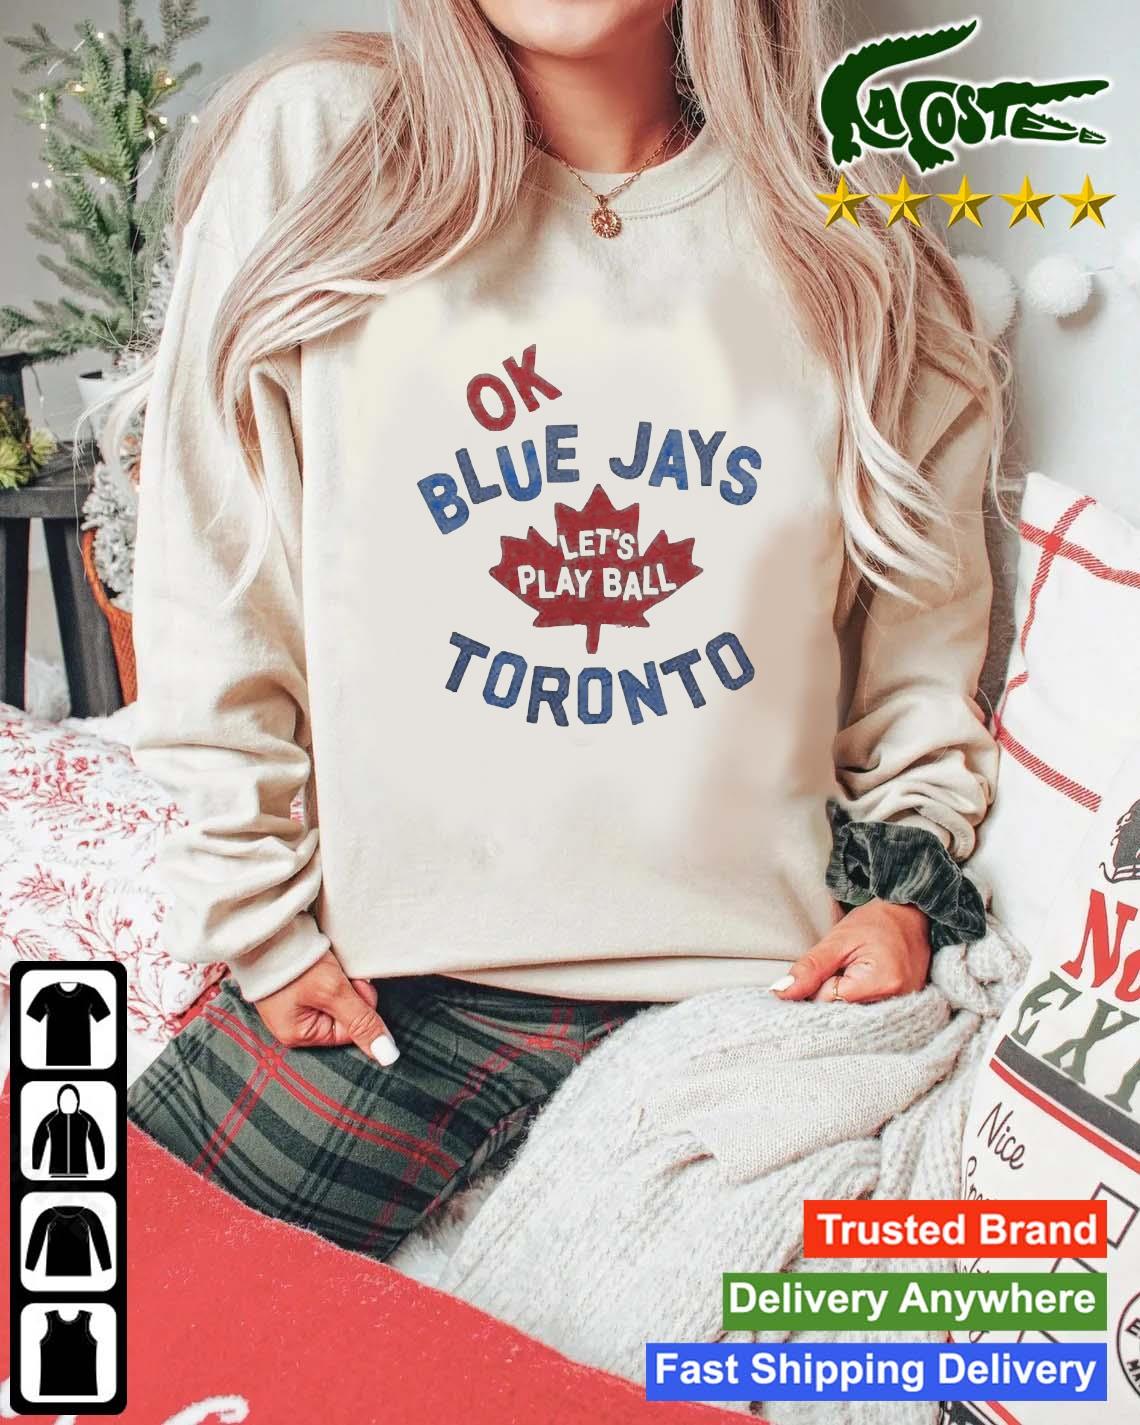 Official Toronto Blue Jays Let’s Play Ball Sweats Mockup Sweater